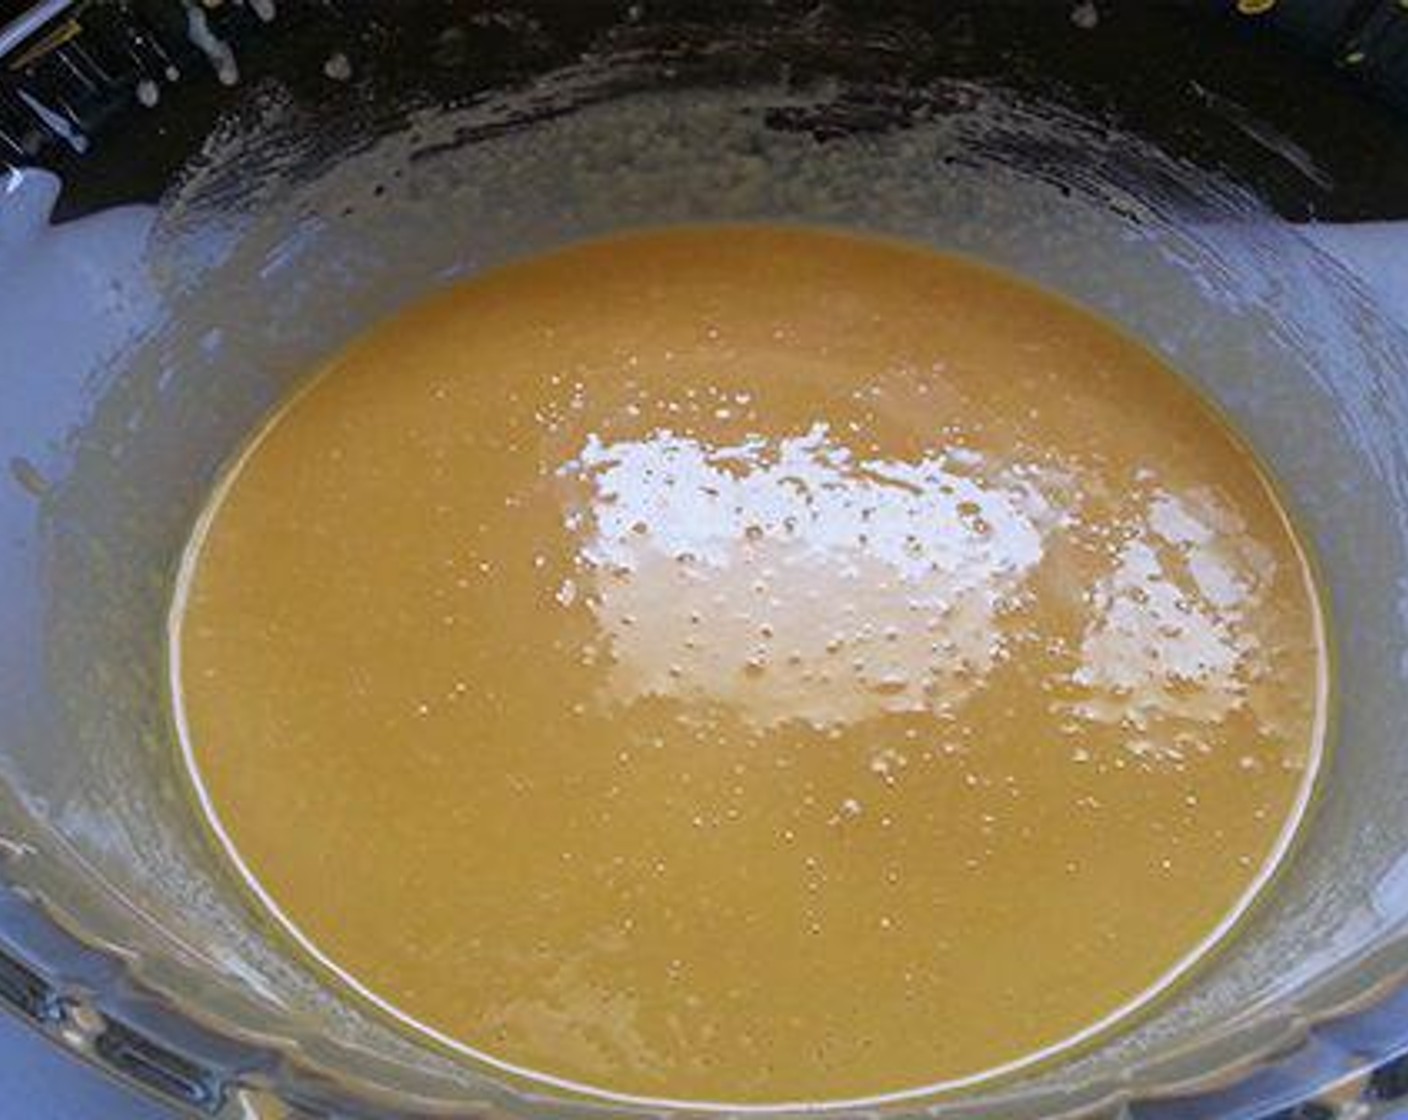 step 2 Melt the Ghee (3/4 cup) and pour it in a microwave-safe bowl. Add Powdered Confectioners Sugar (1 cup). Mix well then add the toasted flour. Continue to mix - make sure there are no lumps.